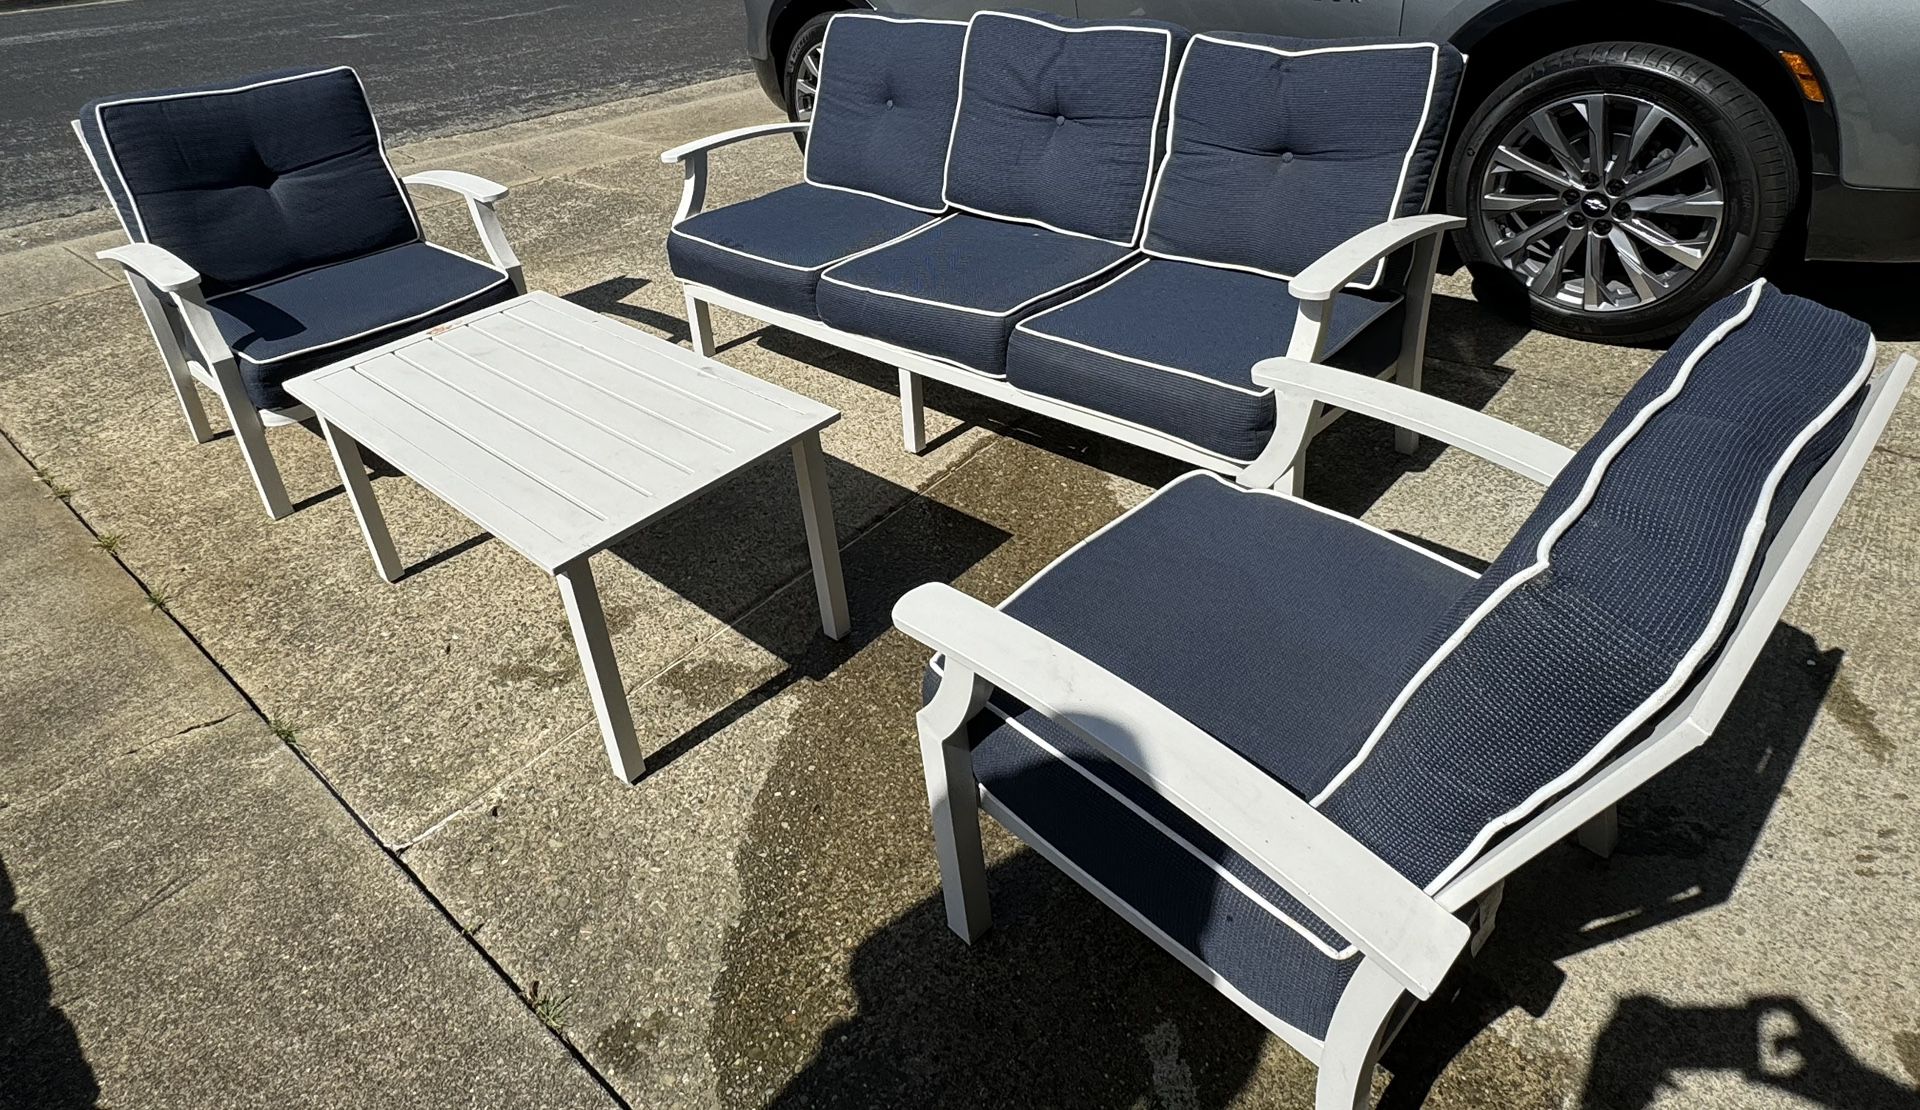 🌞 Outdoor Patio Furniture Sale! Complete Set for $100 or Best Offer!